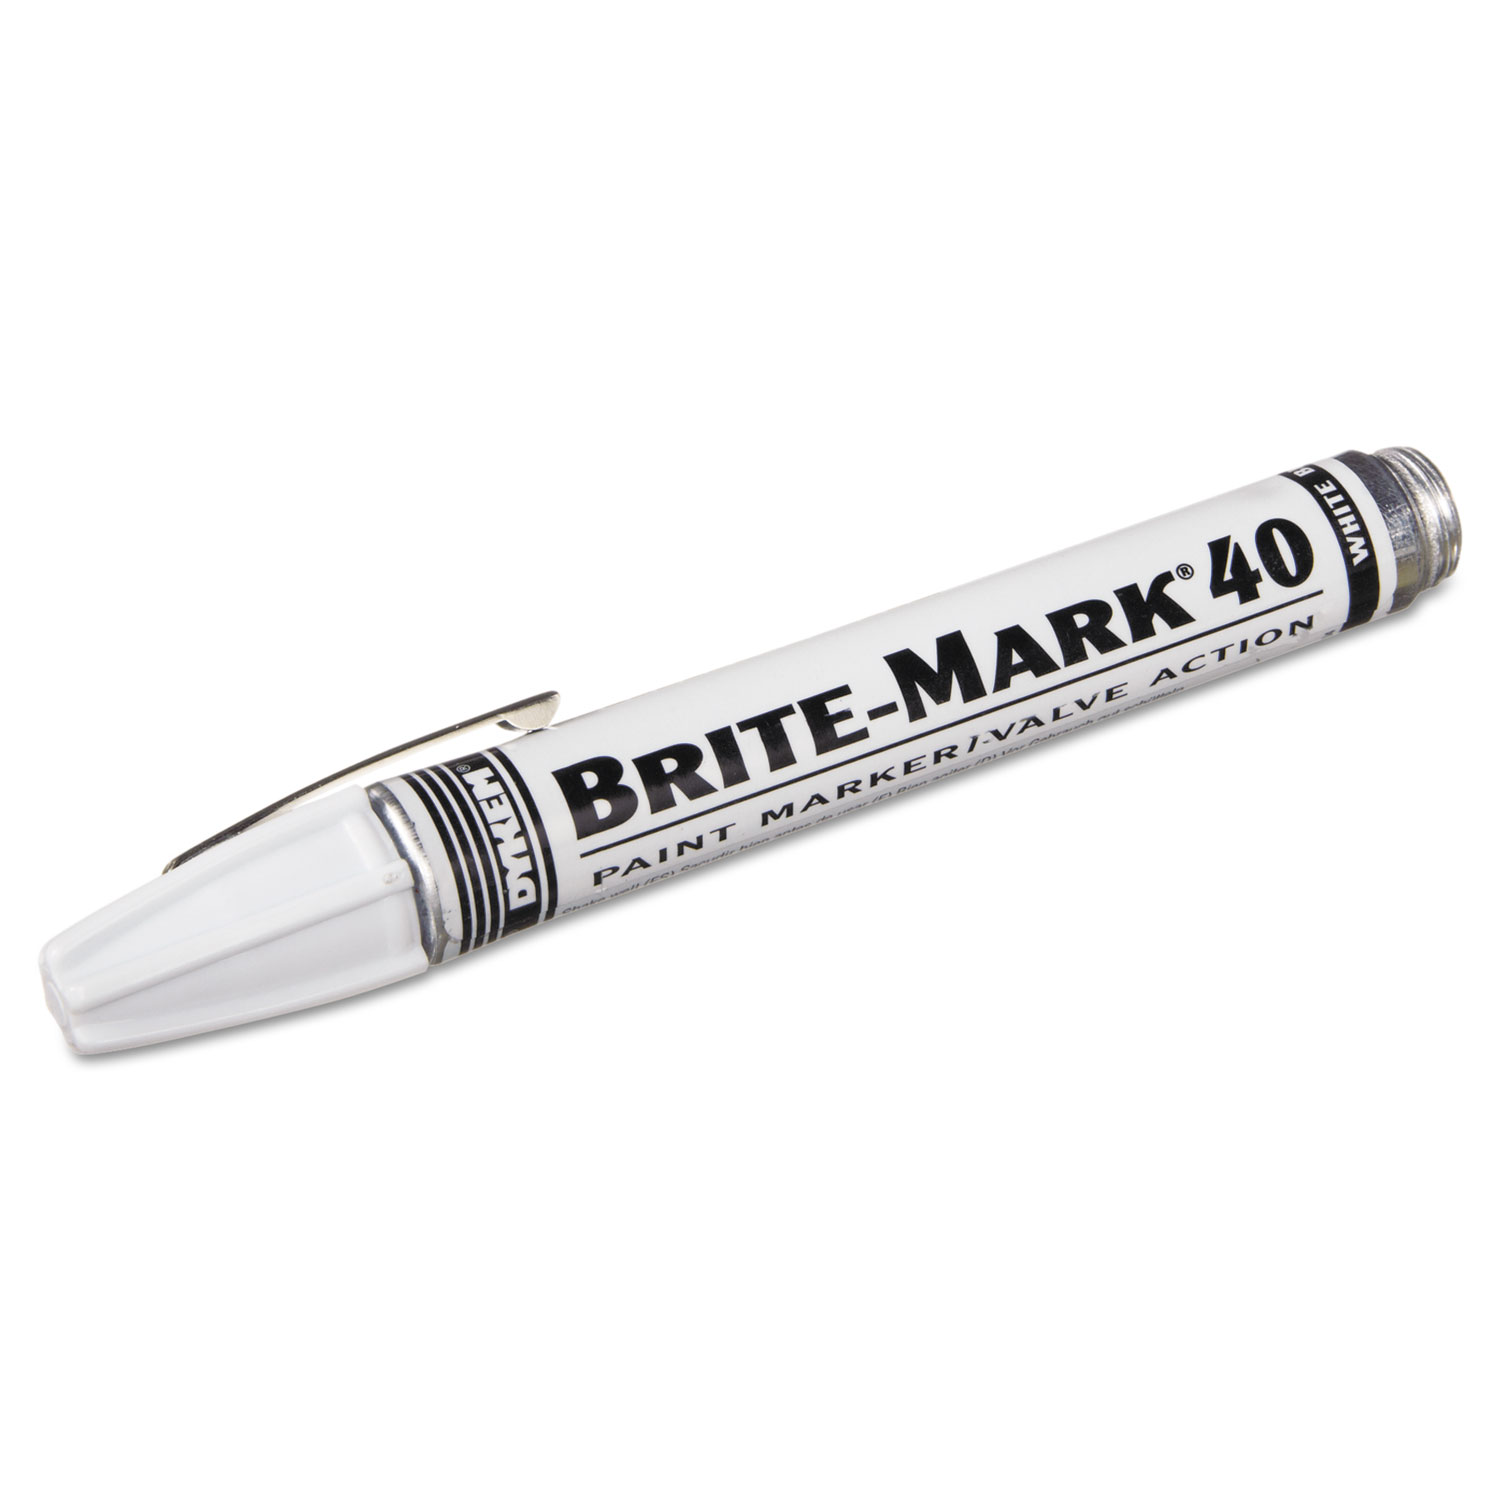 BRITE-MARK 40 Paint Markers, Broad Bullet Tip, White